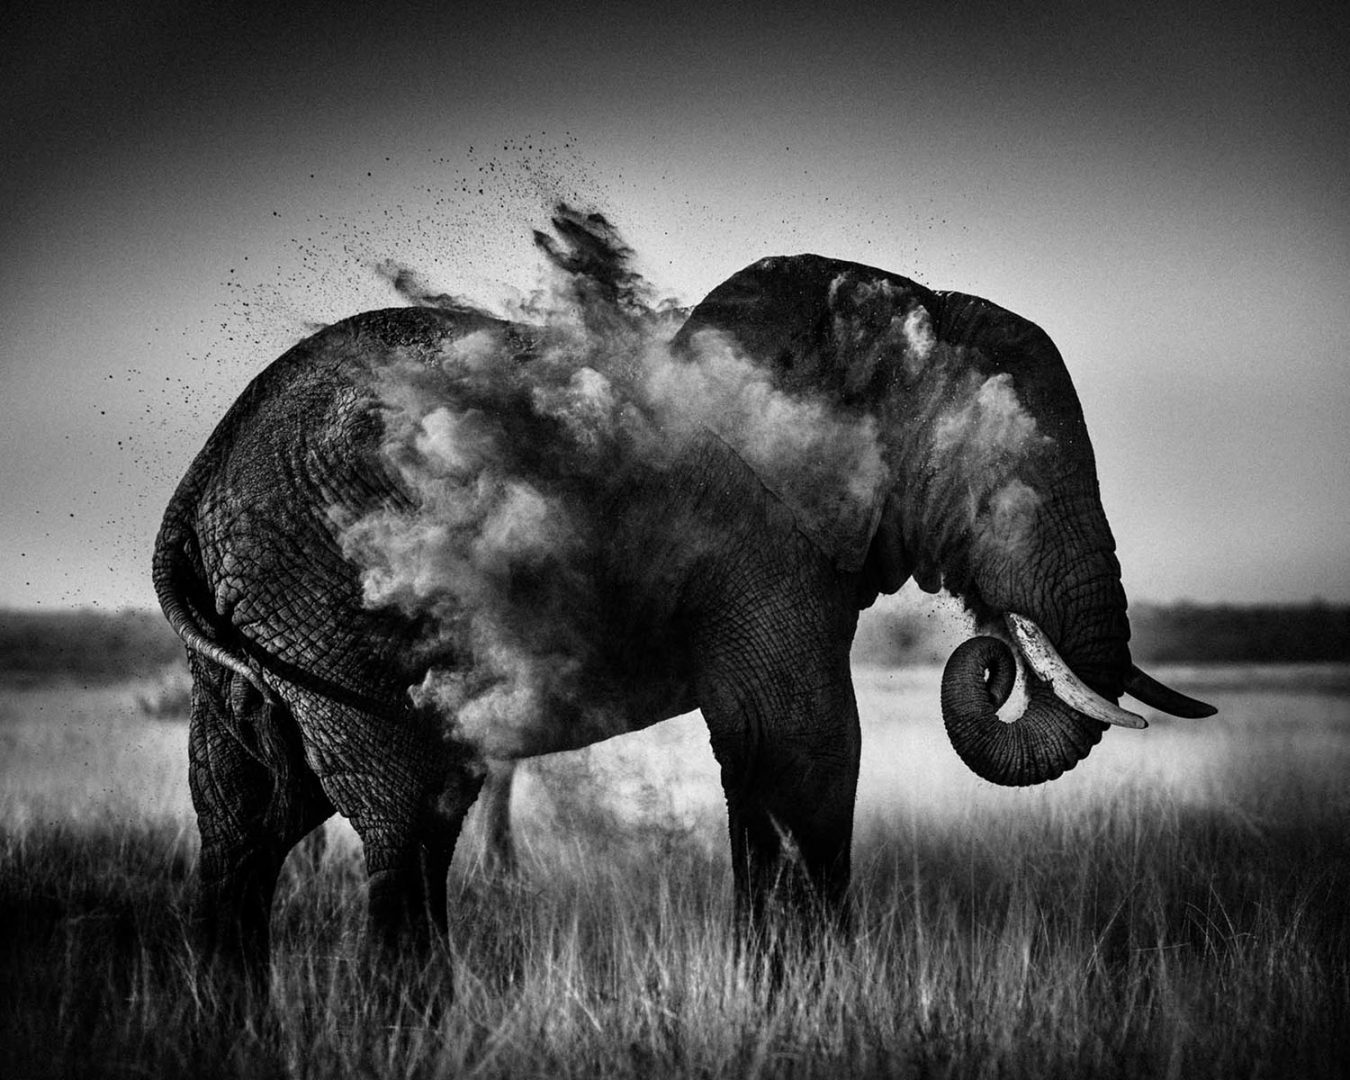 Laurent Baheux – Black and white Africa